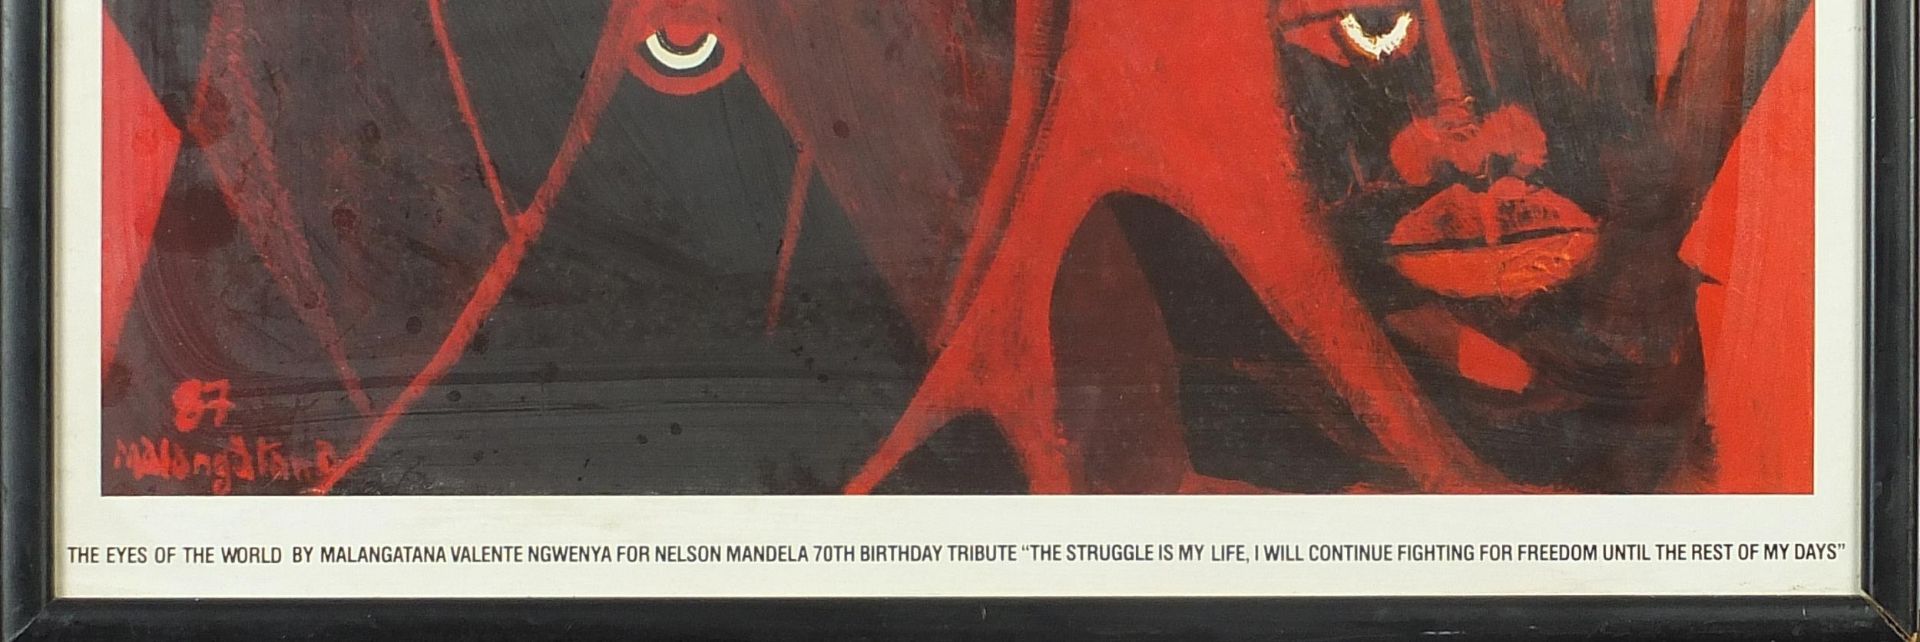 Set of five Nelson Mandela 70th birthday tribute posters including The Struggle is My Life by - Image 19 of 19